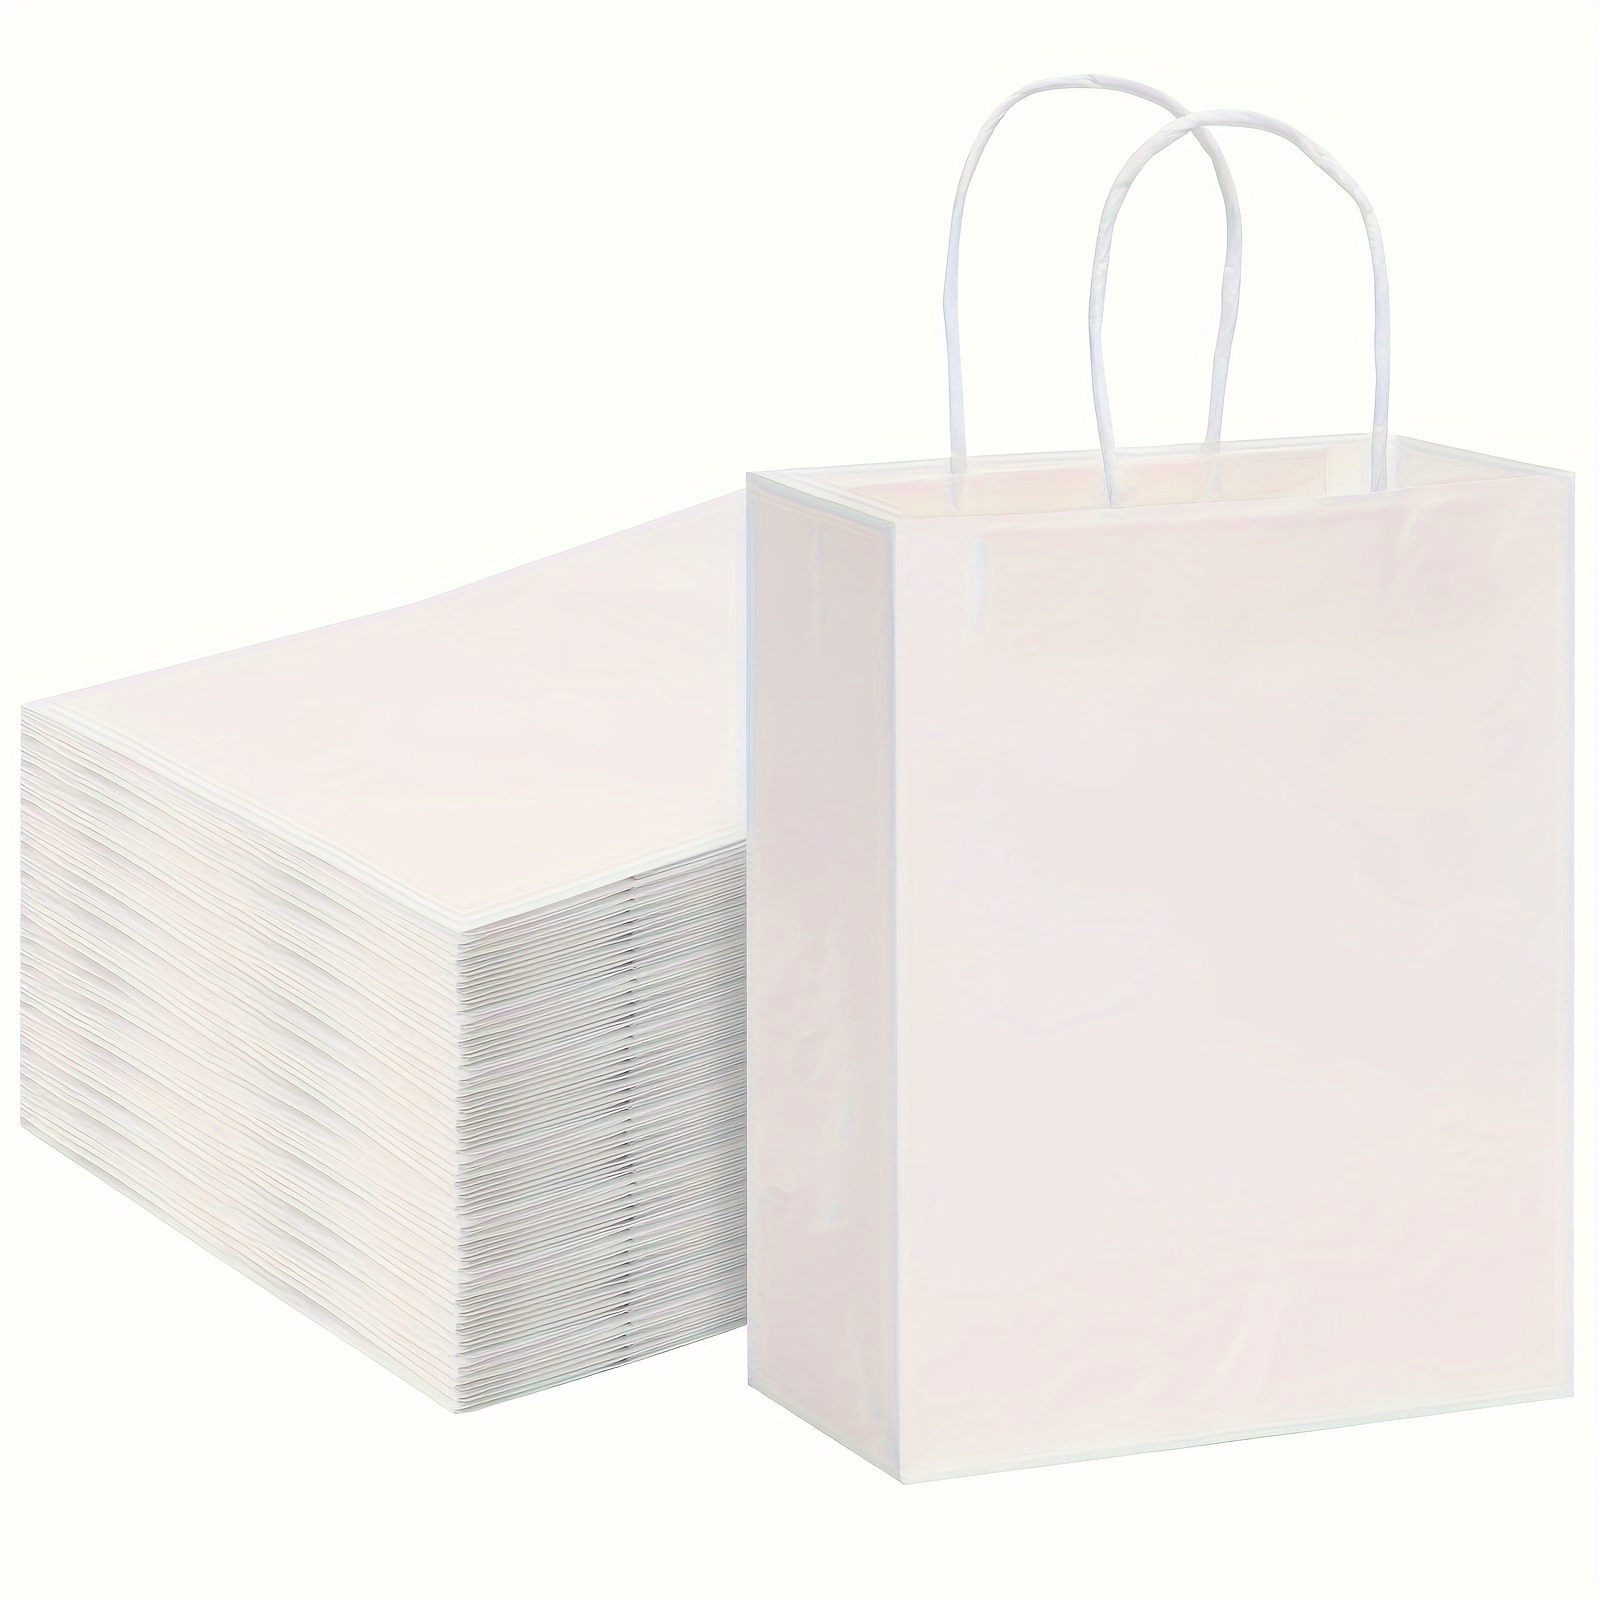 White Paper Shopping Bags with Handles 16x6x12 / White / 100 Pcs